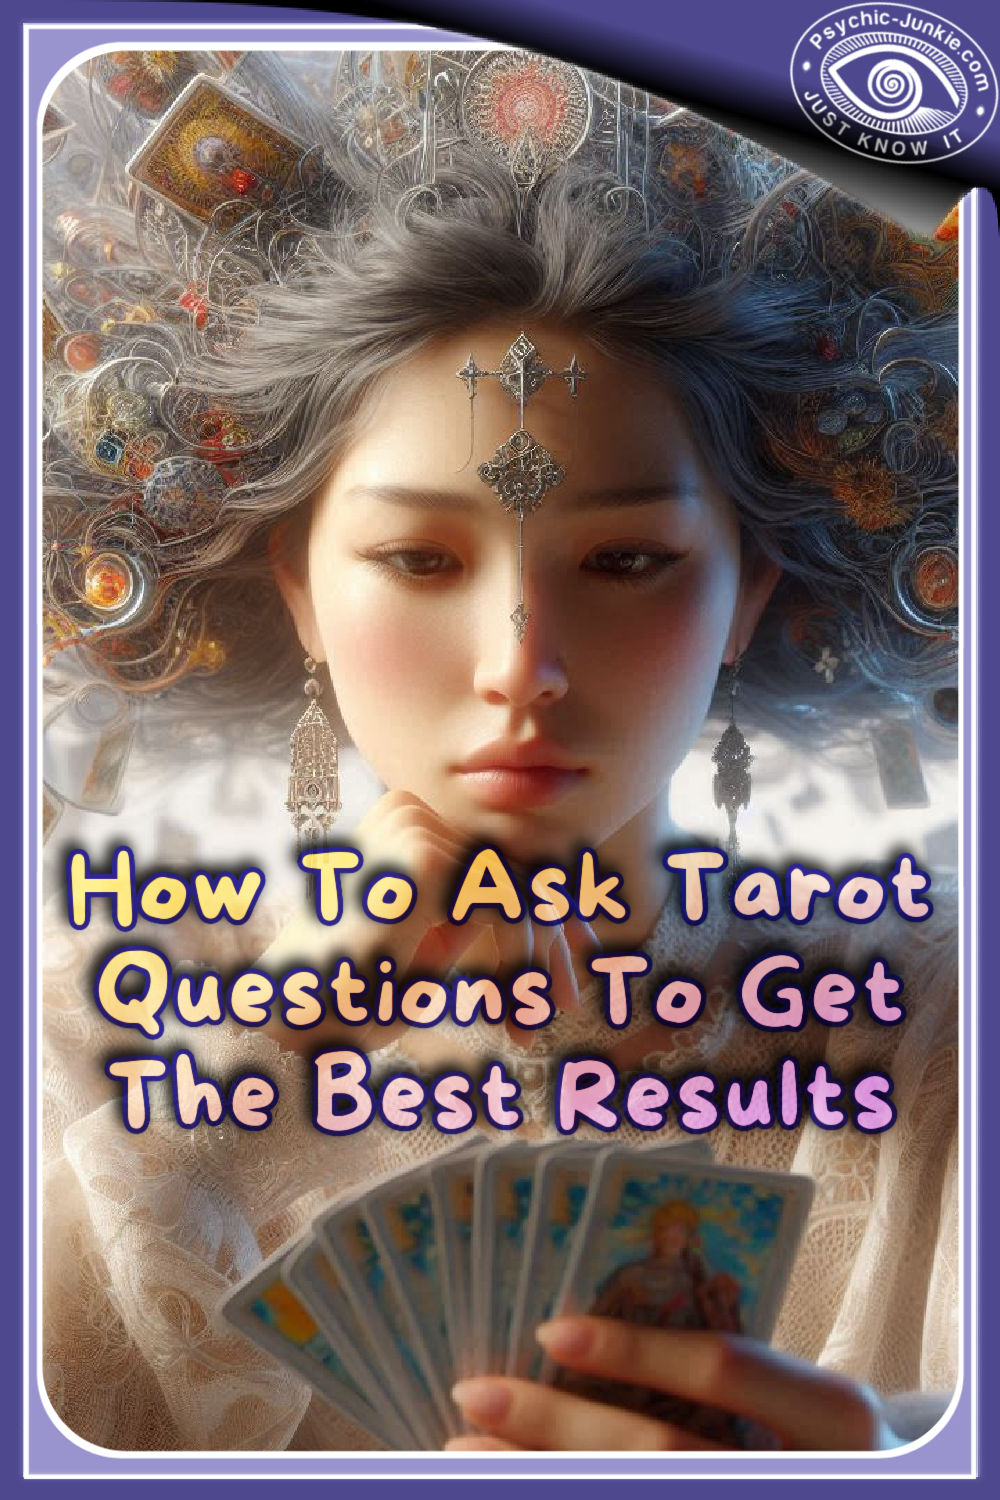 How To Ask Tarot Questions For The Best Results